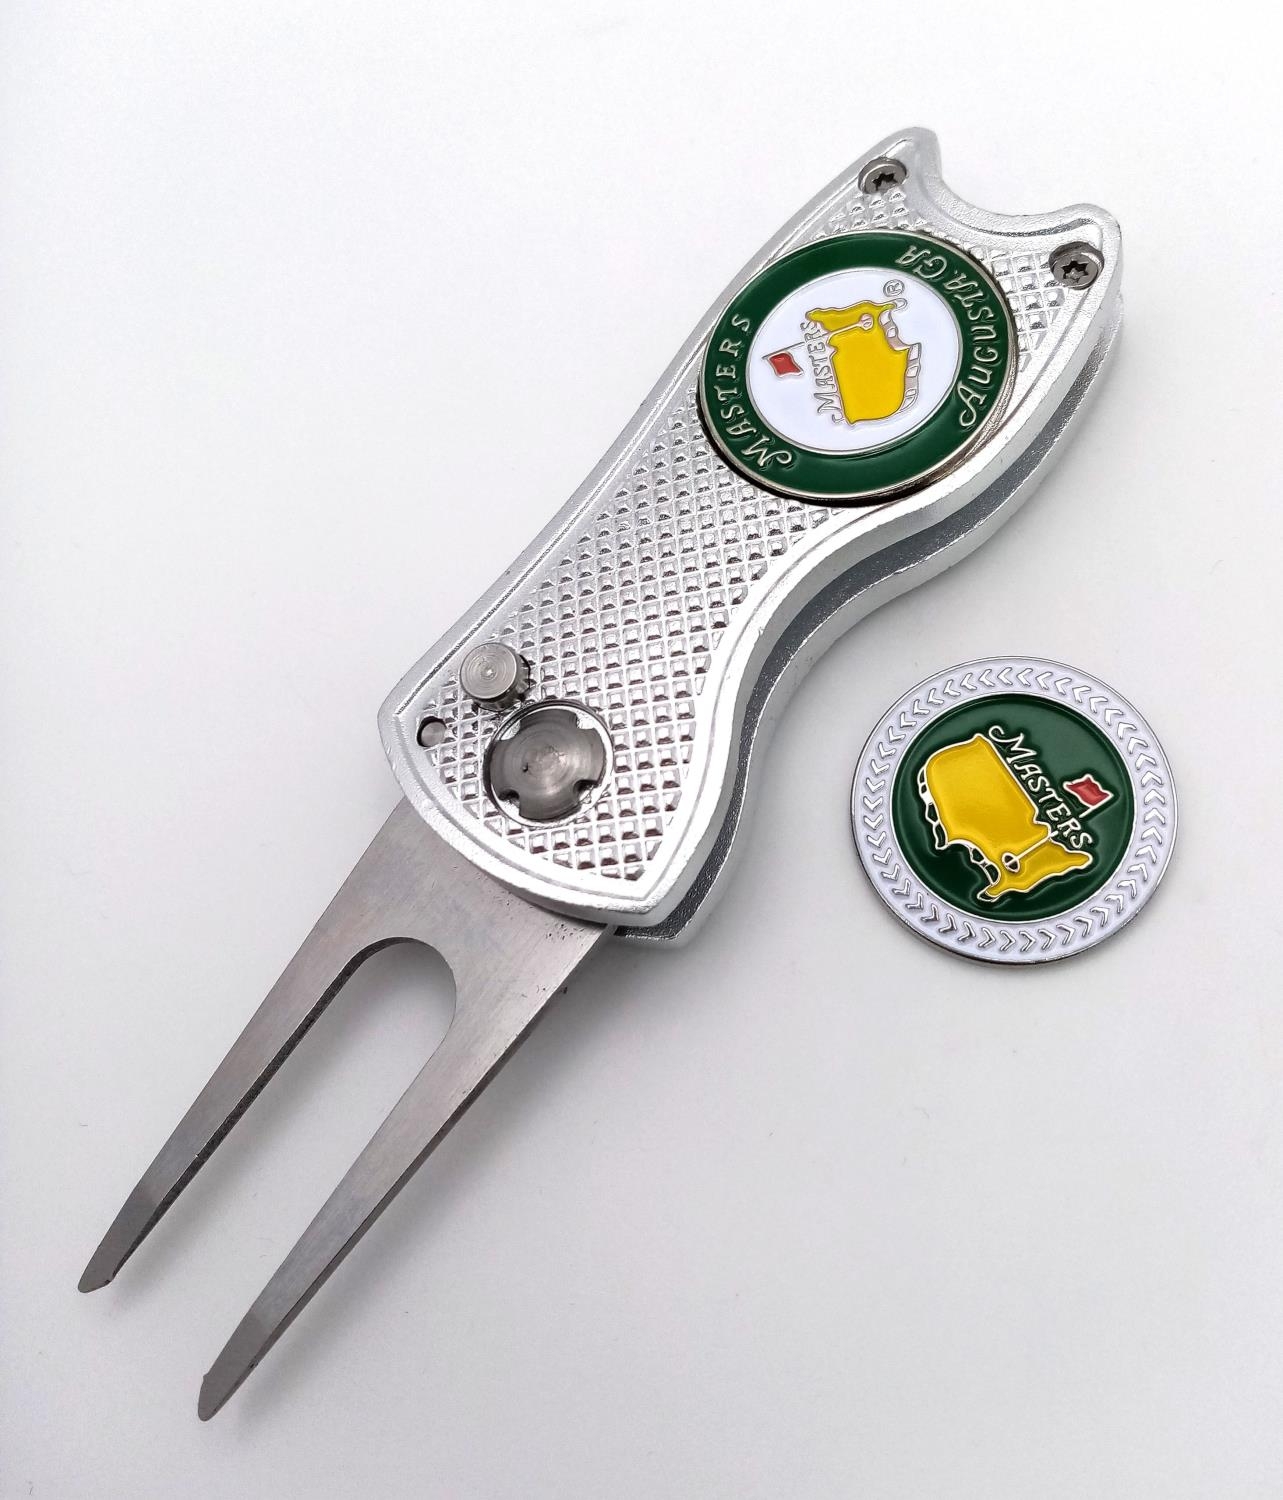 A 'Flick' Tool Golf Putting Green Divot Repairer with two Commemorative 'Masters' Ball Markers. As